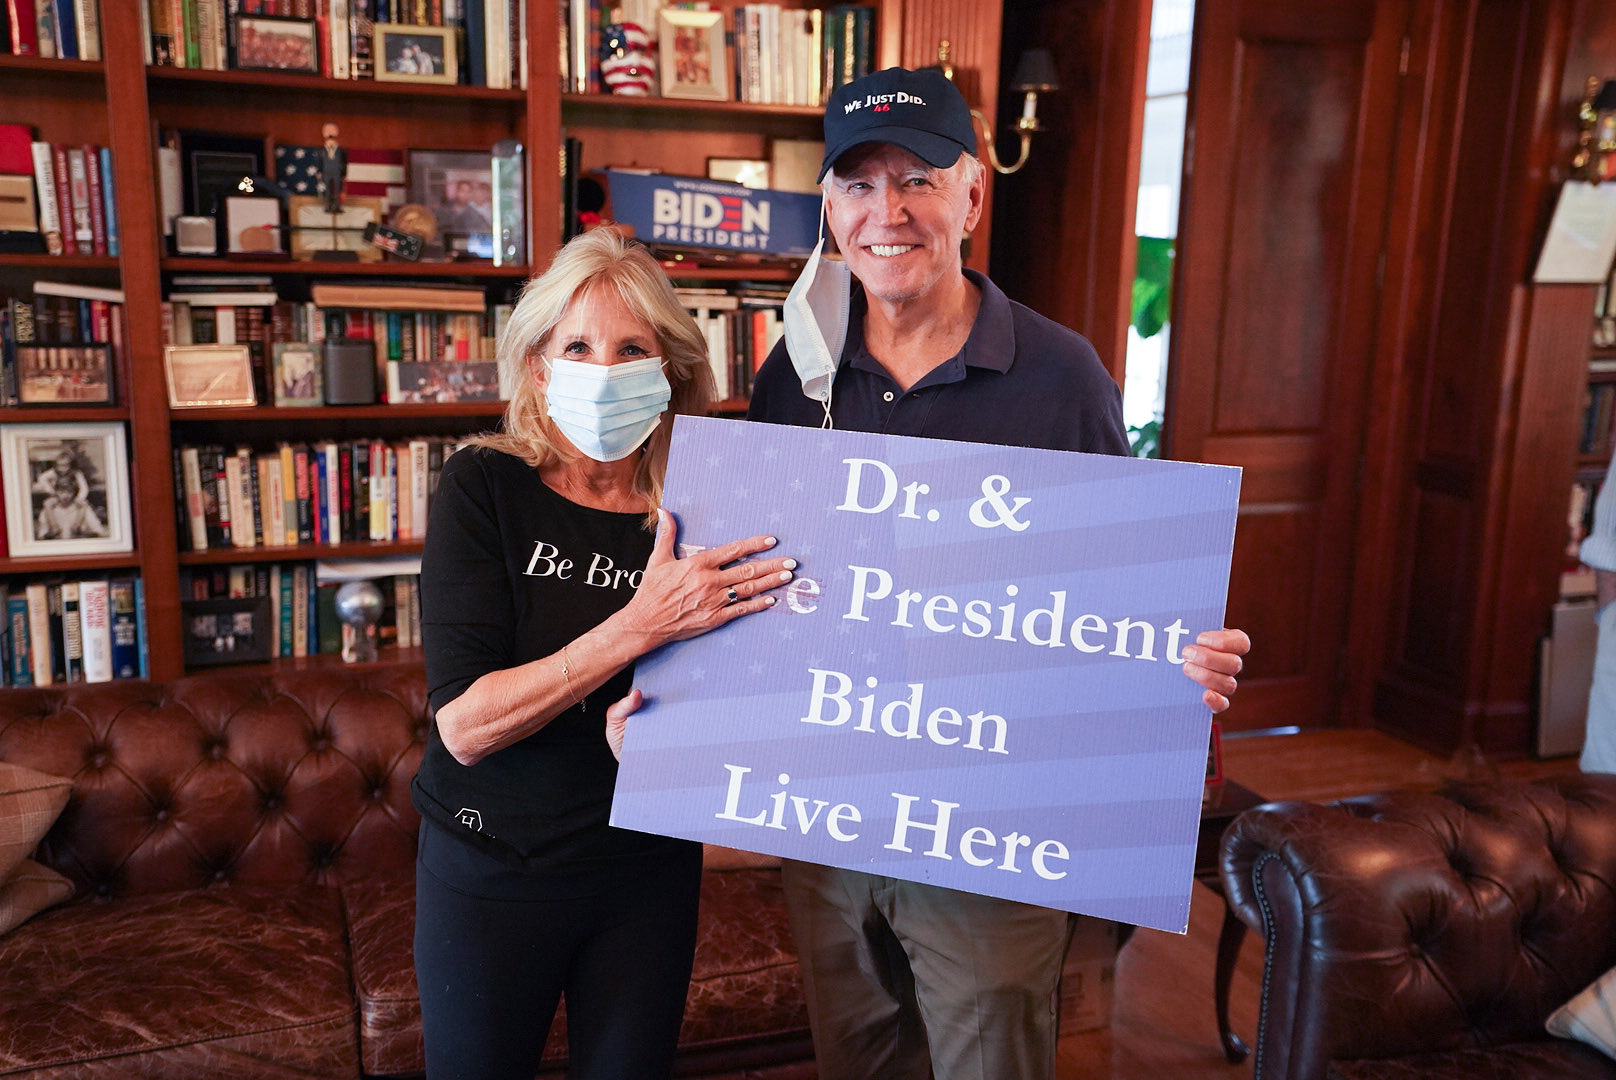 Doctor and President Biden live here